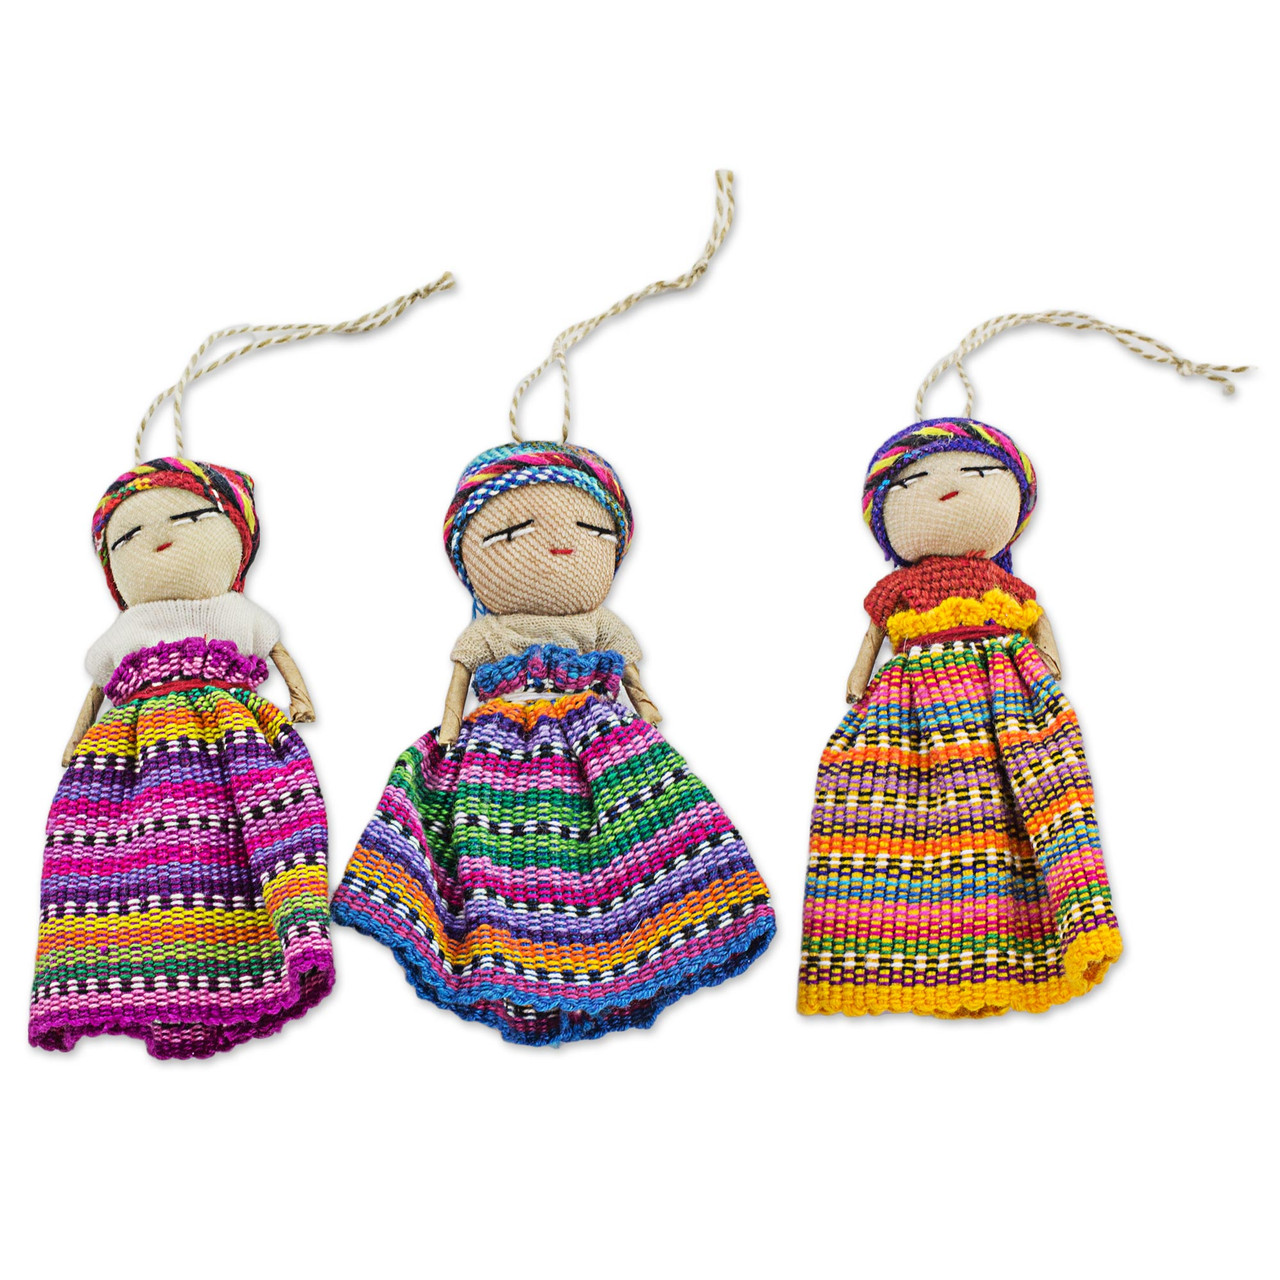 Hand Made Cotton Figurines and Bag Set of 12 Guatemala 'Worry Doll